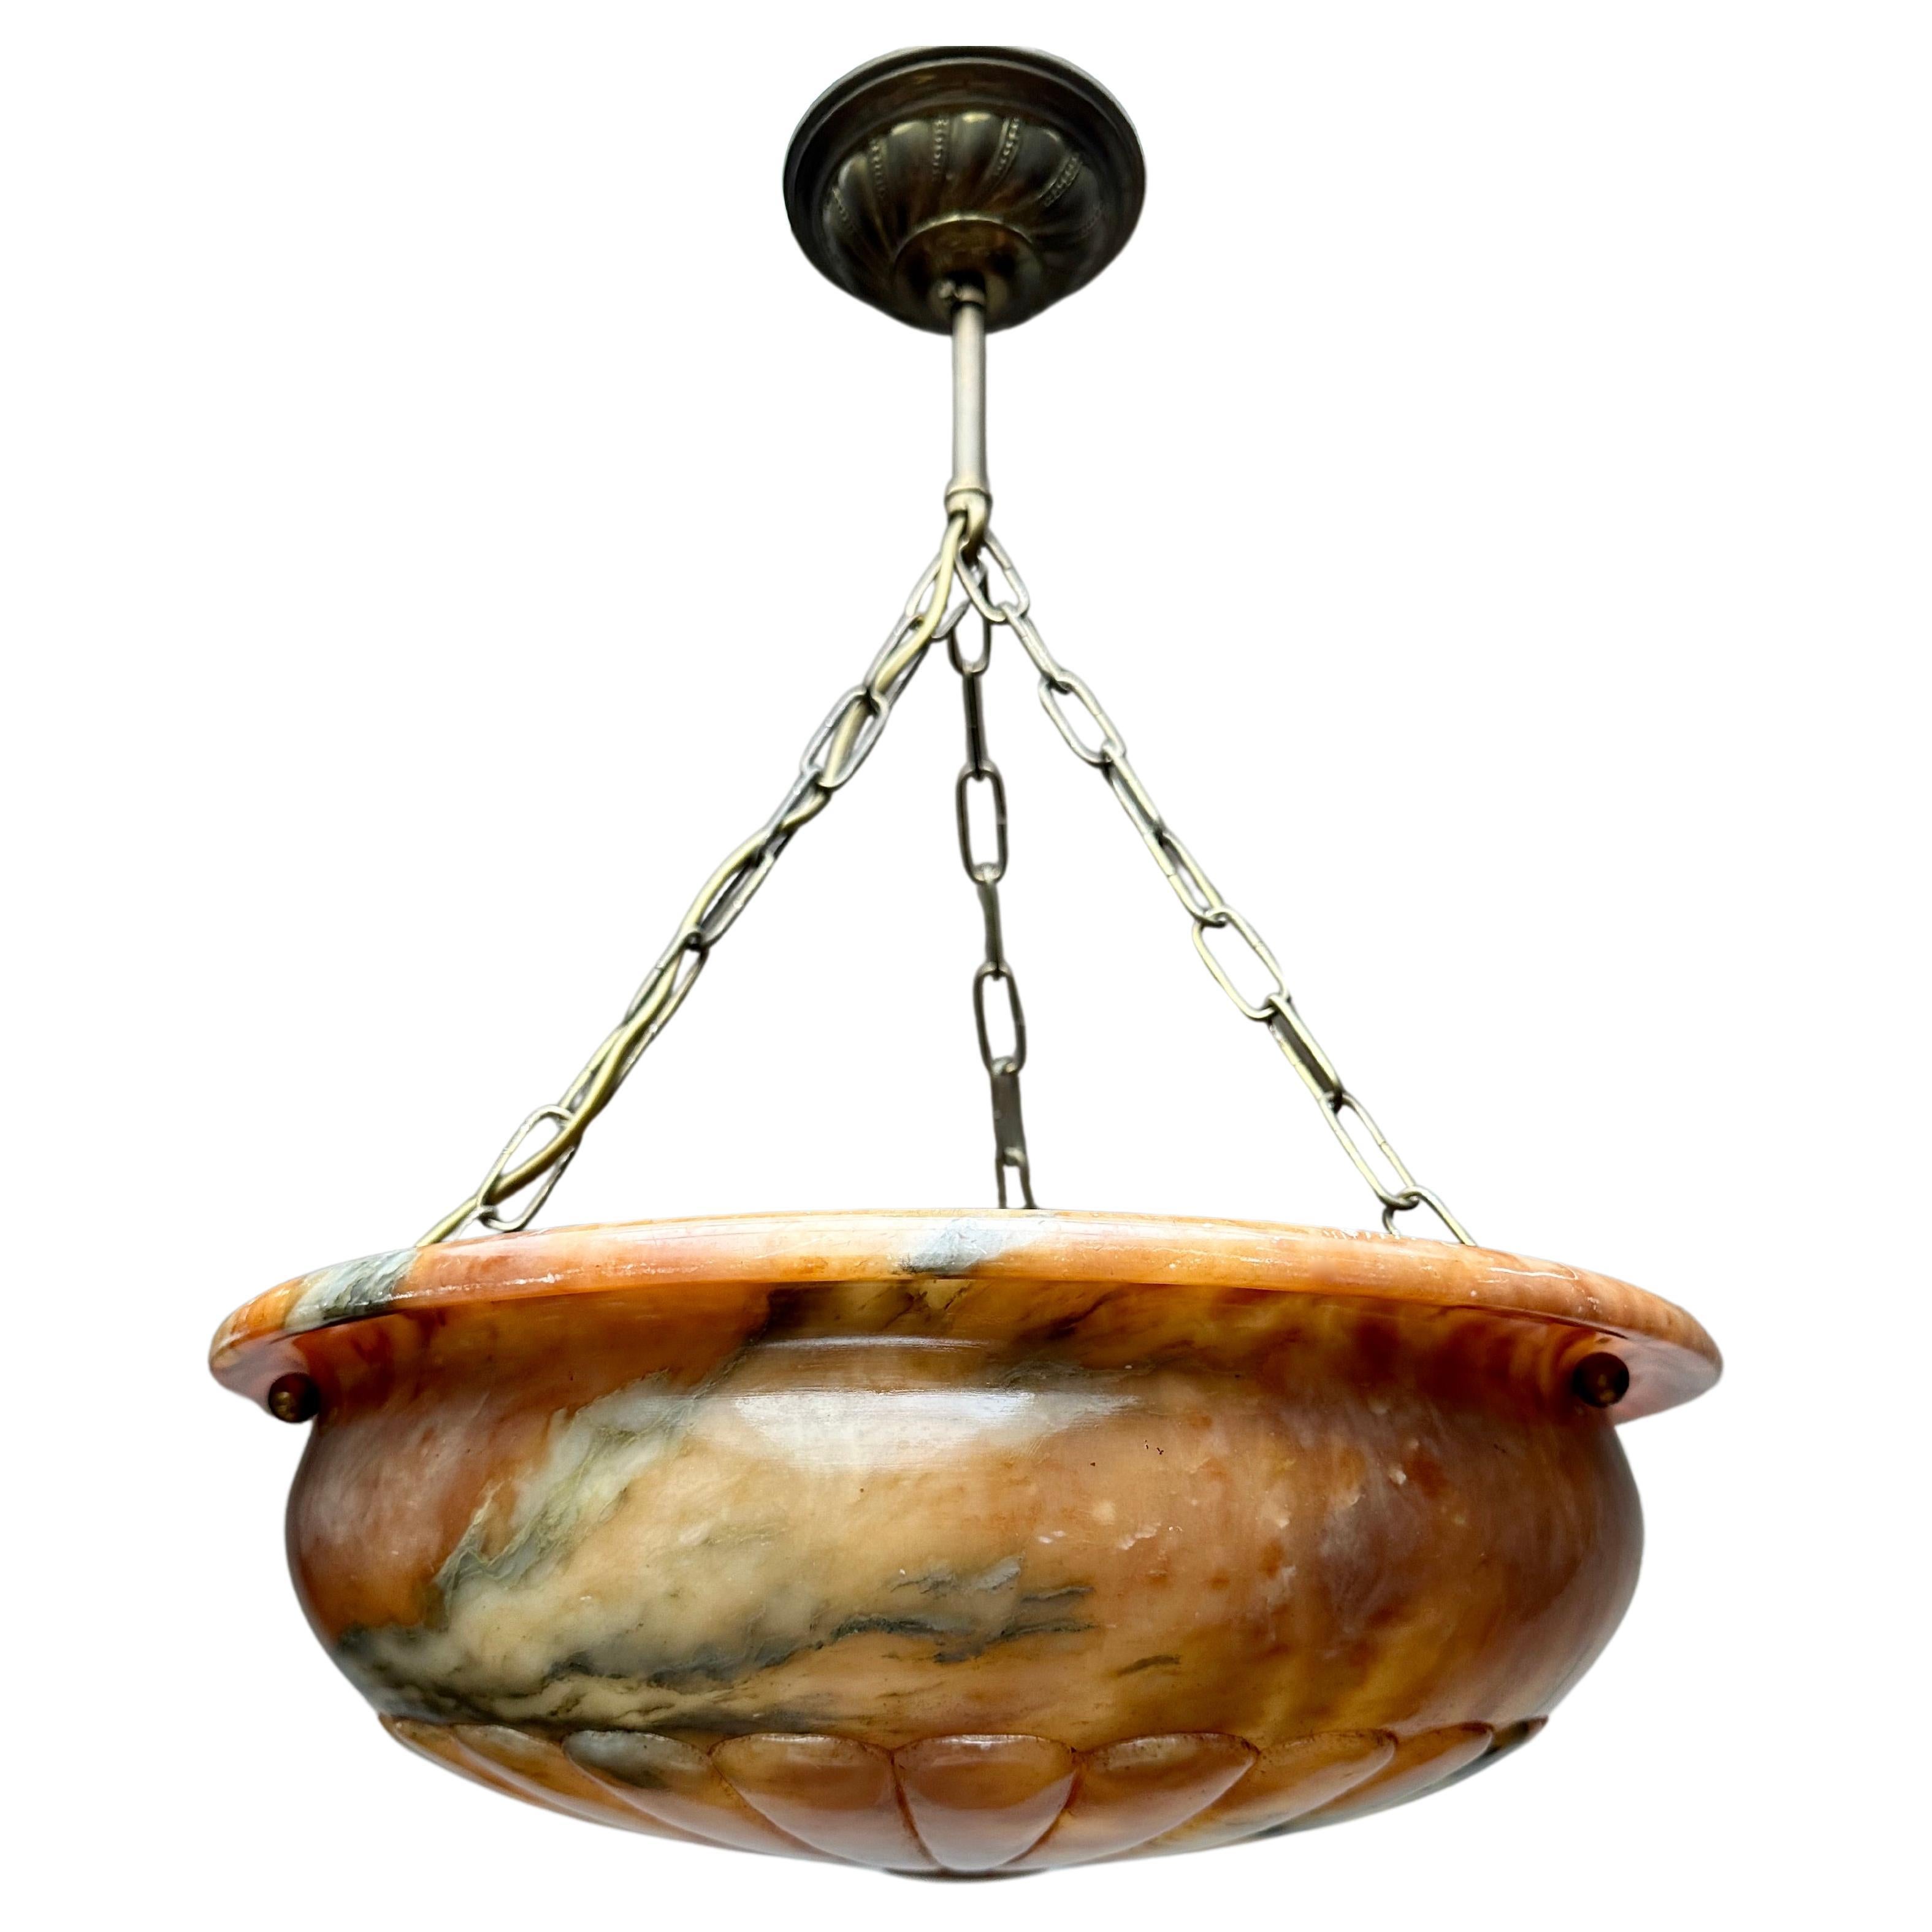 One of a kind and perfectly balanced light fixture with a stunning alabaster shade.

Thanks to its beautiful and classical design and its truly good condition this perfectly balanced alabaster chandelier too will light up both your days and evenings